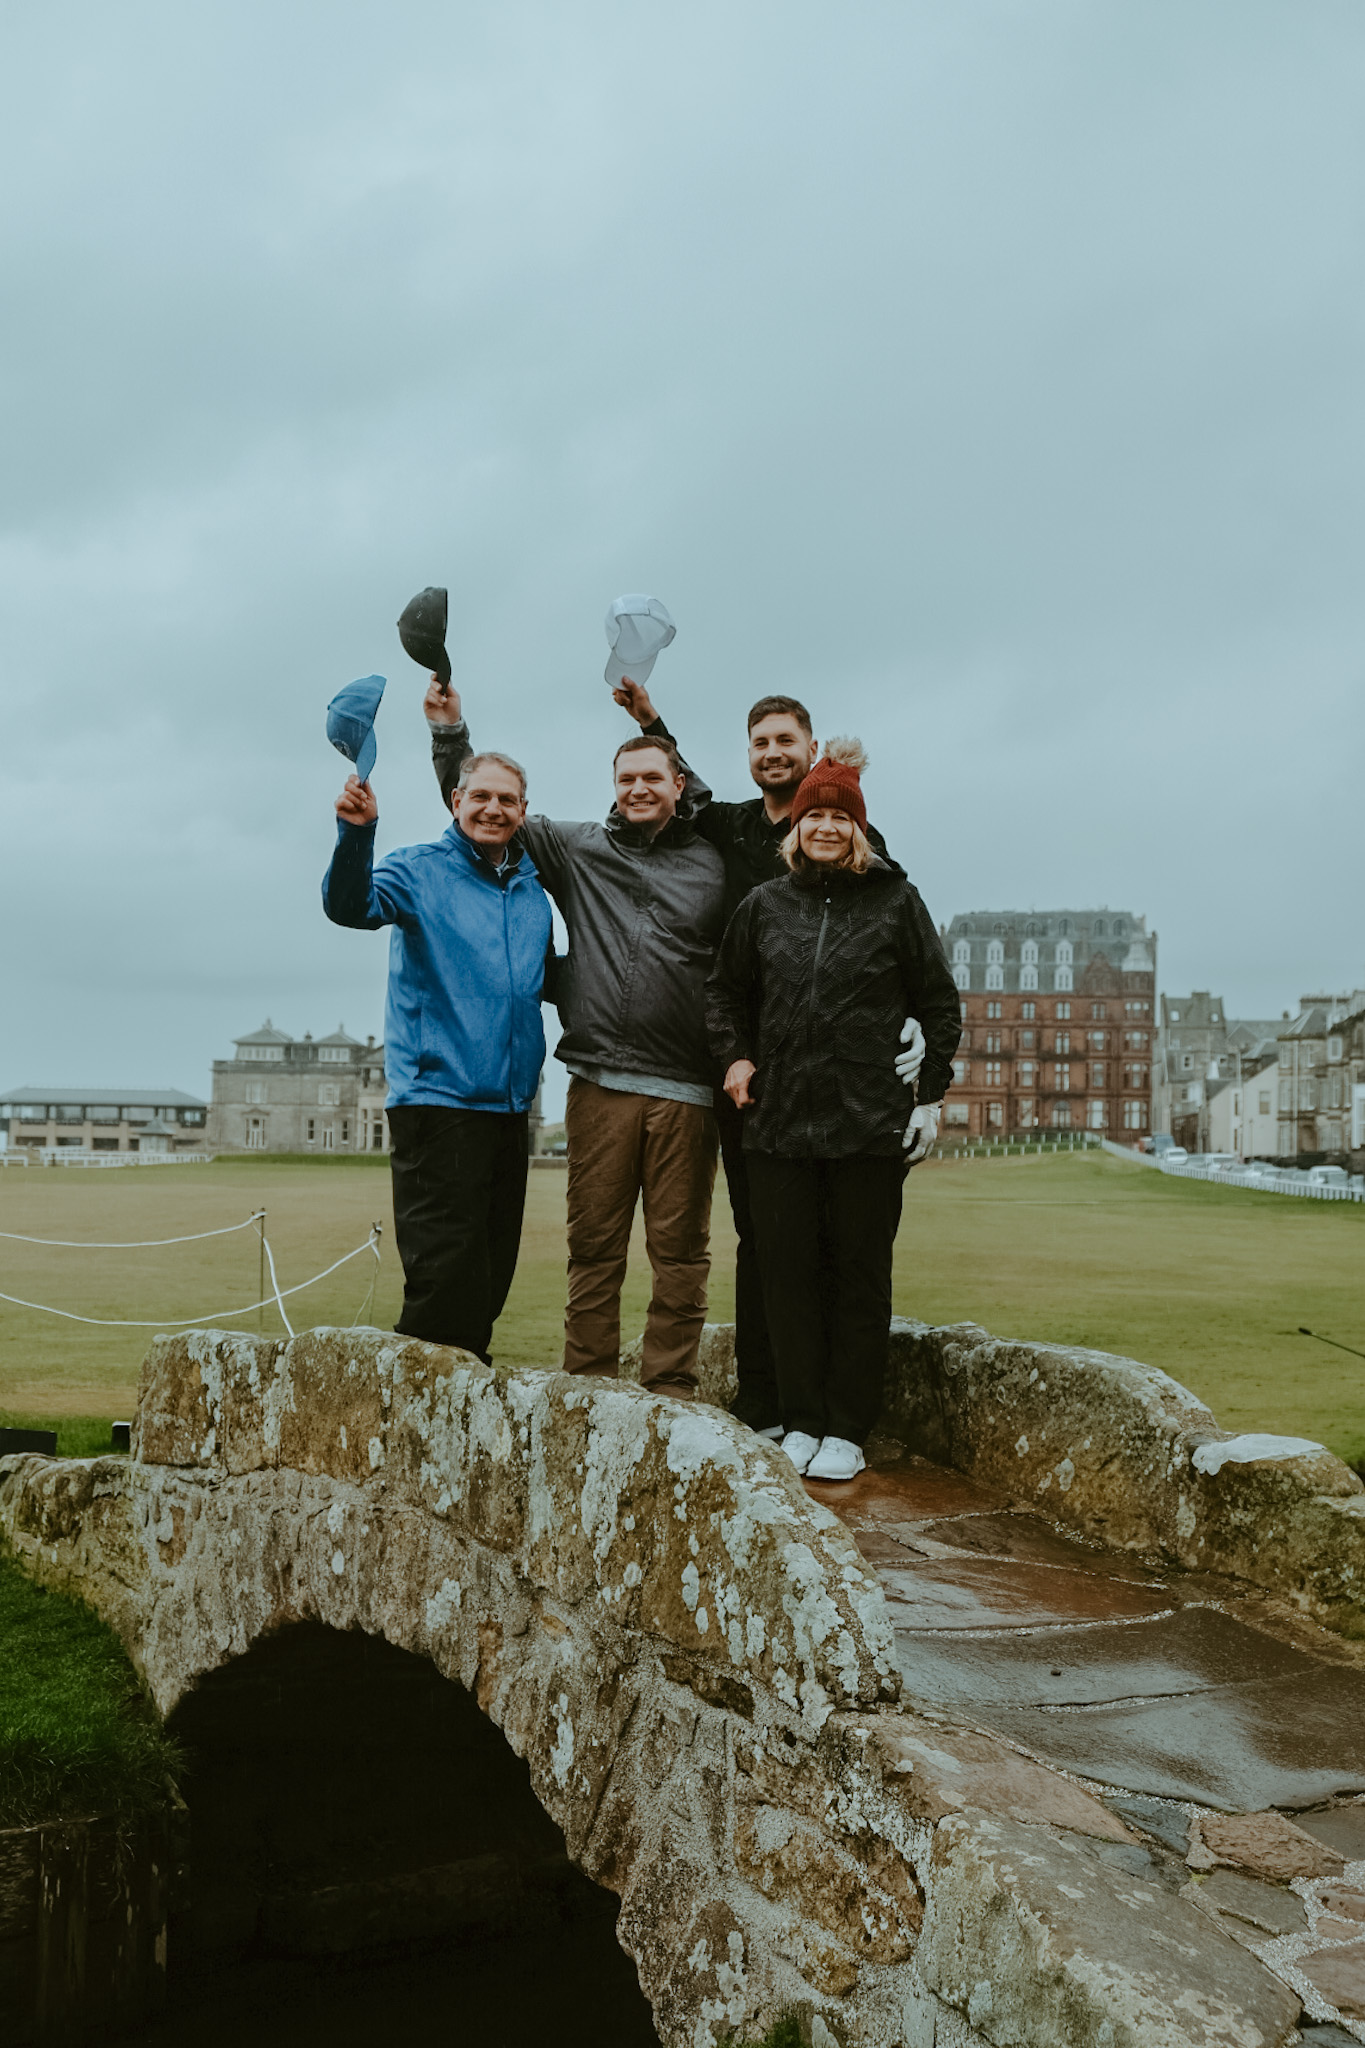 Golfing at The Old Course in St Andrews, Scotland.